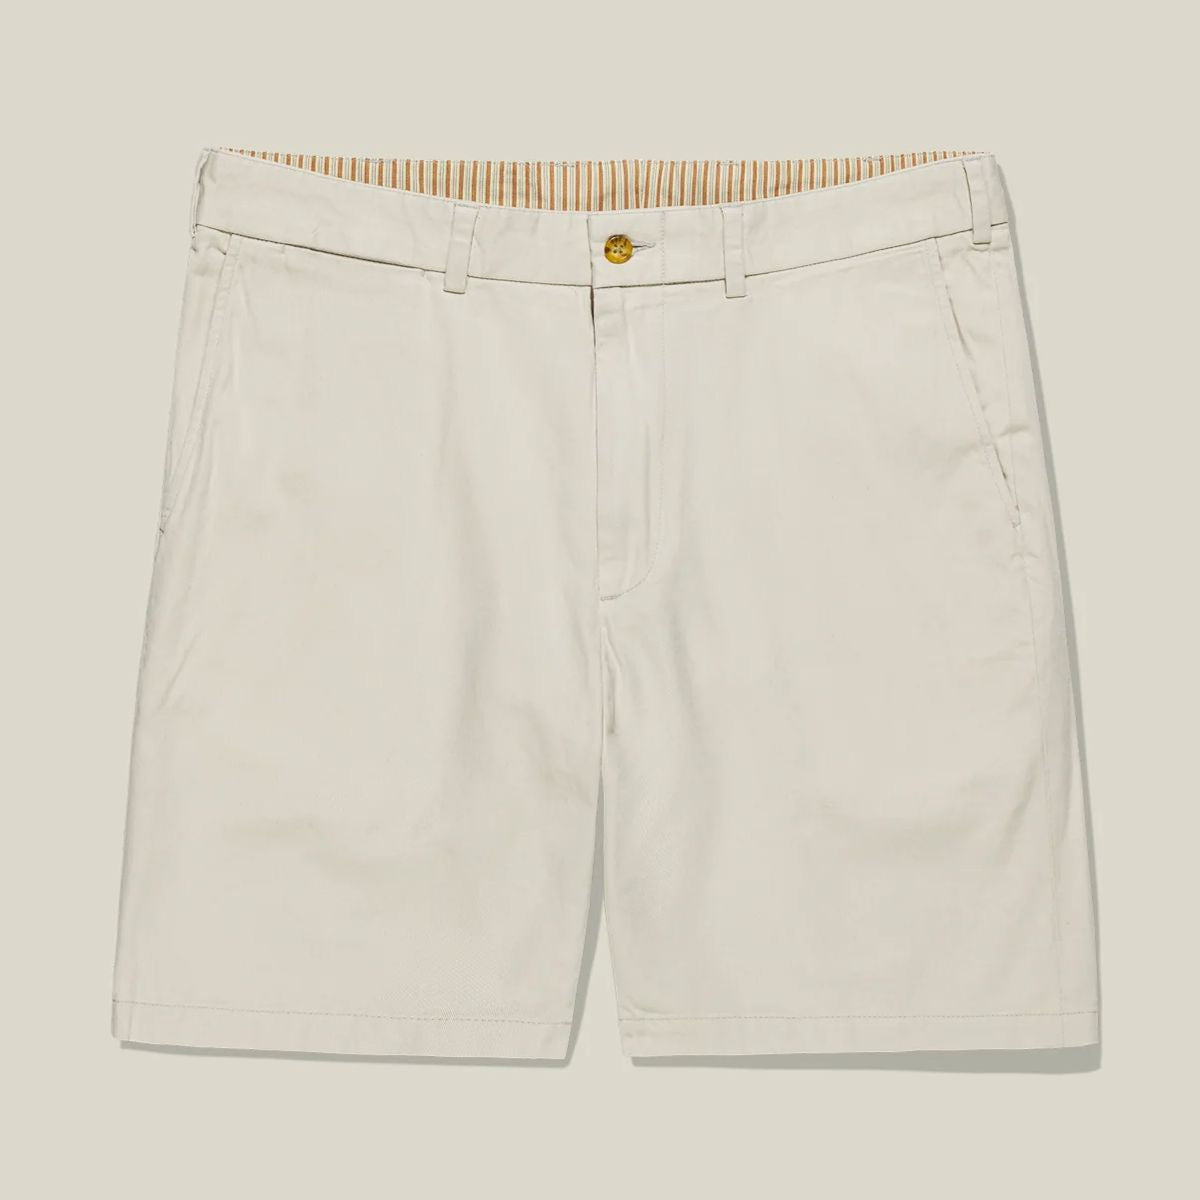 M3 Straight Fit Vintage Twill Shorts in Stone by Bills Khakis